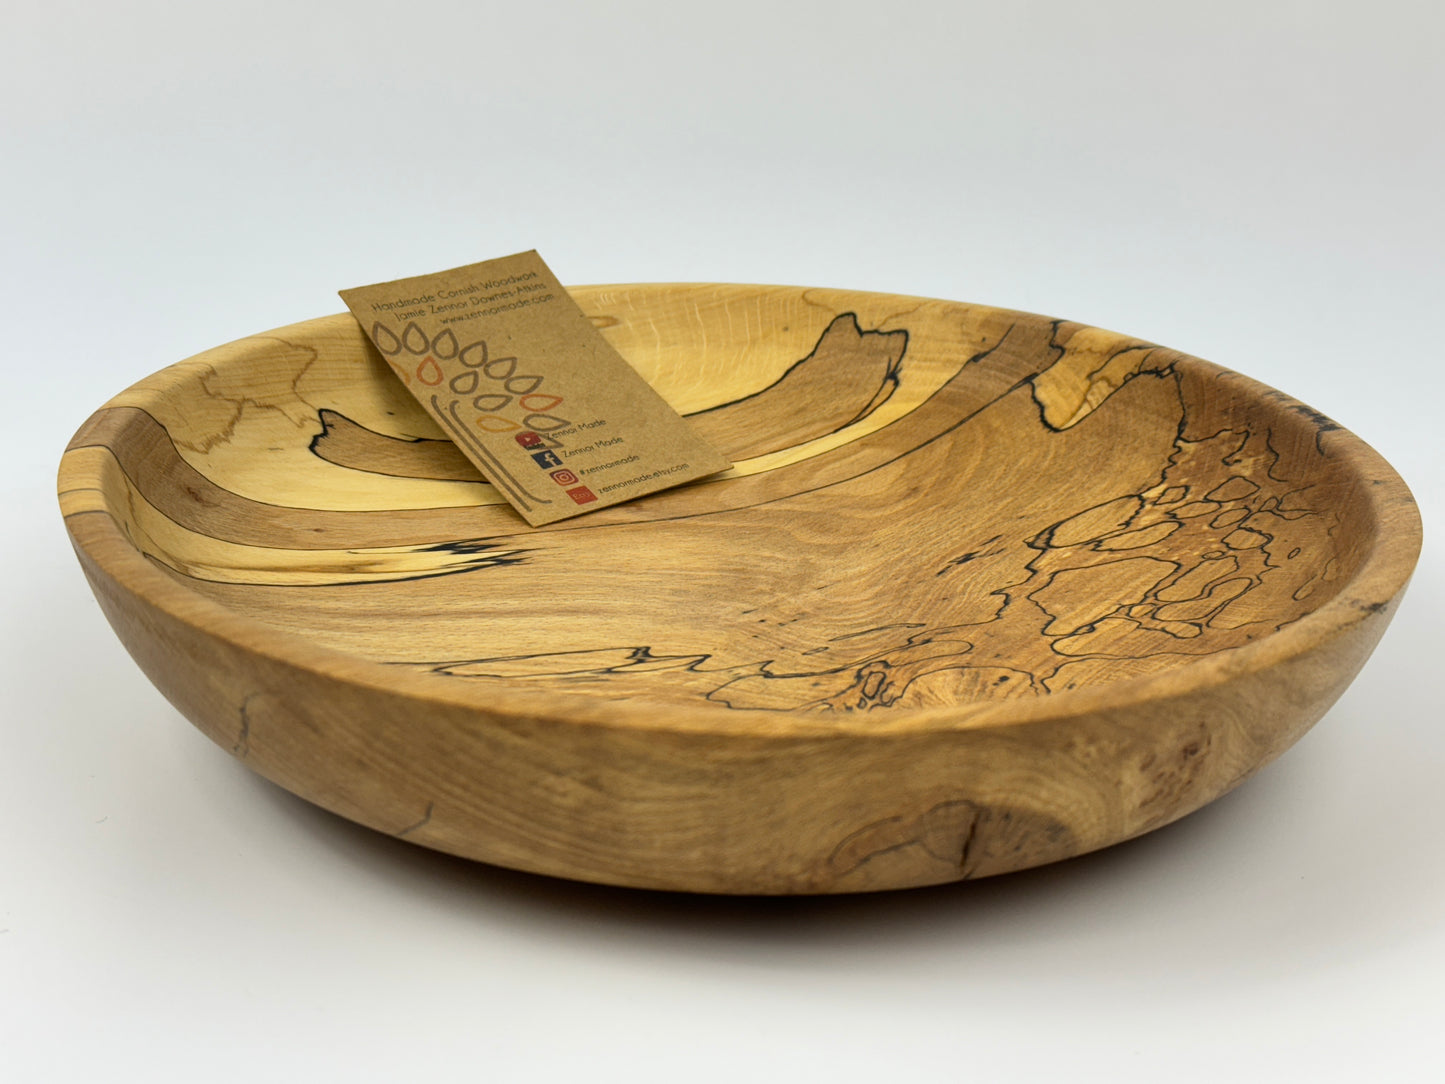 Spalted Beech Bowl